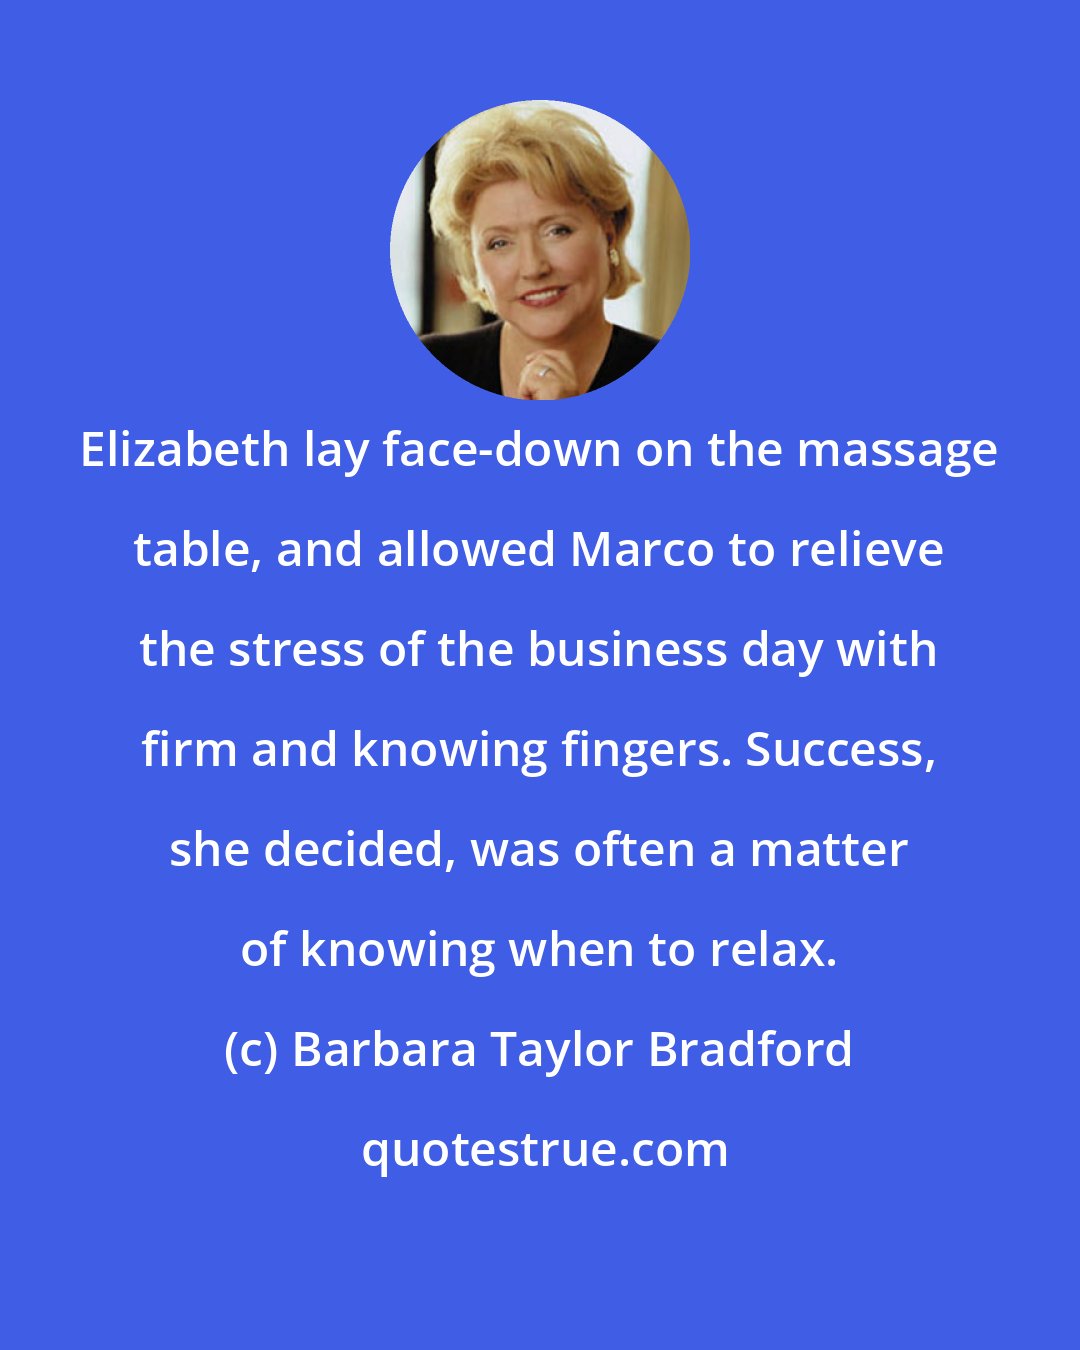 Barbara Taylor Bradford: Elizabeth lay face-down on the massage table, and allowed Marco to relieve the stress of the business day with firm and knowing fingers. Success, she decided, was often a matter of knowing when to relax.